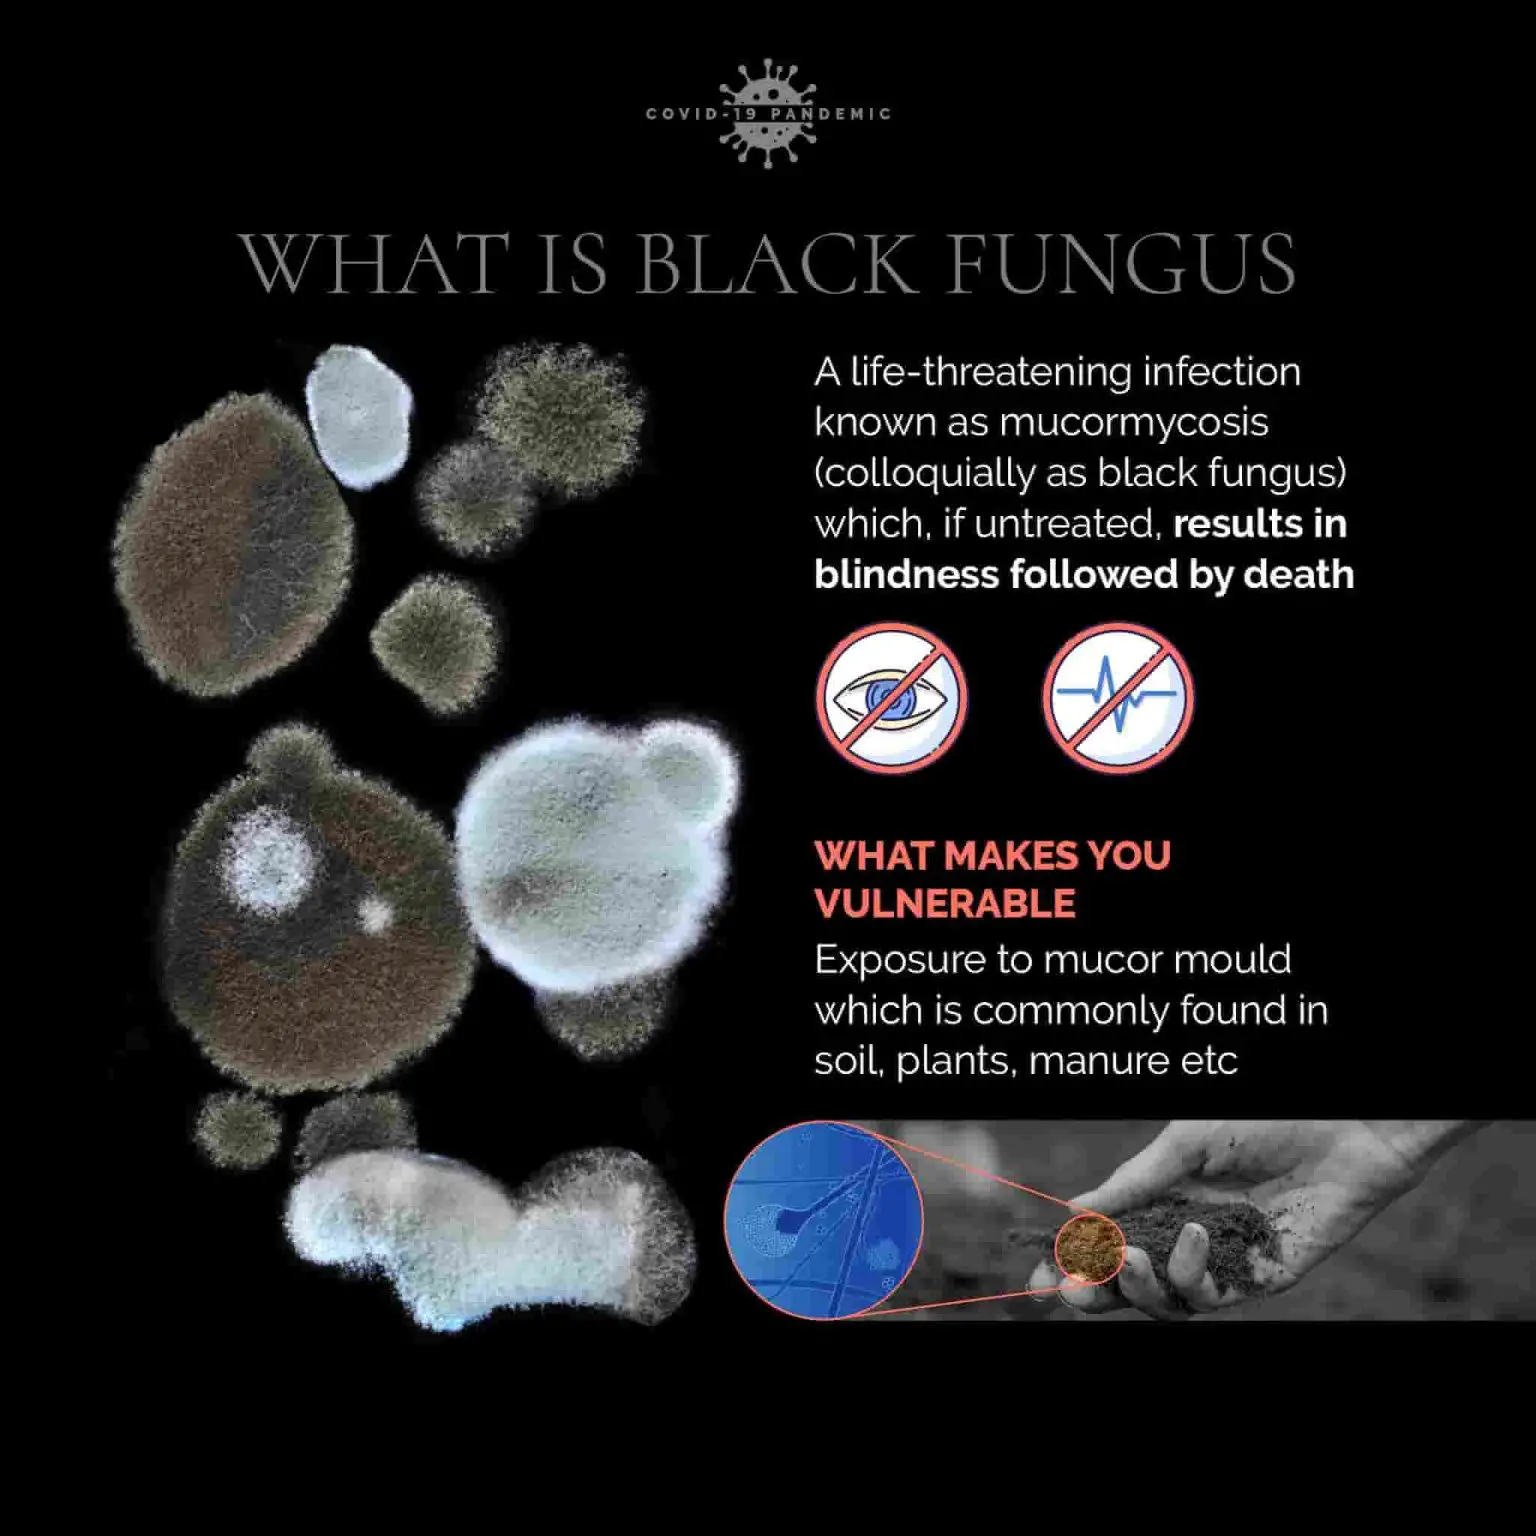 How dangerous is mucormycosis (black fungus infection), how to protect